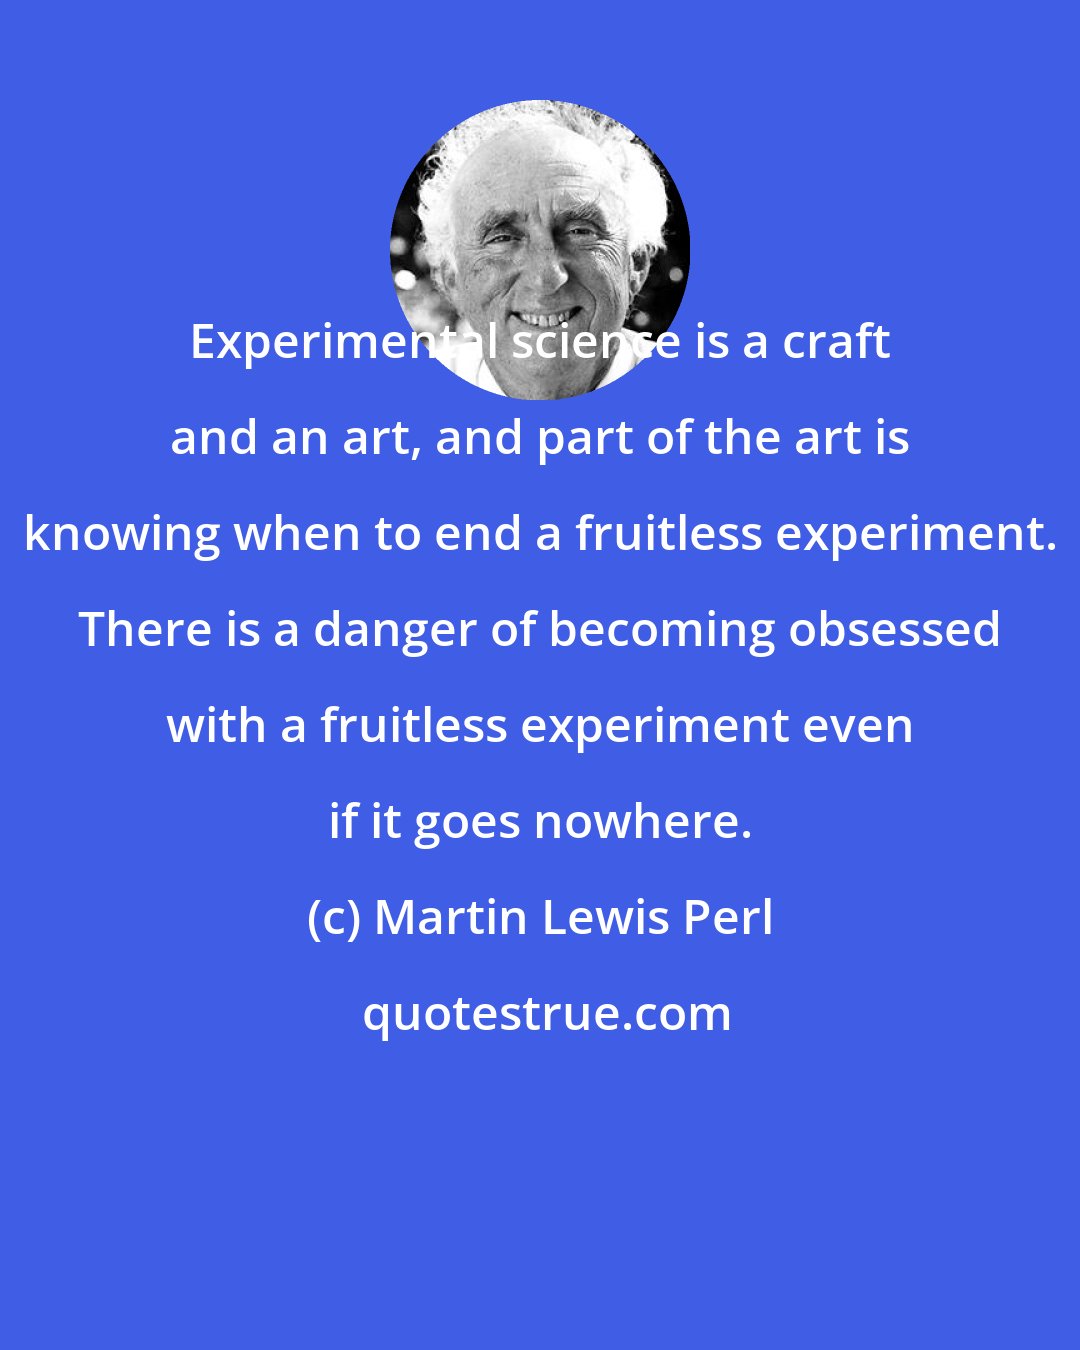 Martin Lewis Perl: Experimental science is a craft and an art, and part of the art is knowing when to end a fruitless experiment. There is a danger of becoming obsessed with a fruitless experiment even if it goes nowhere.